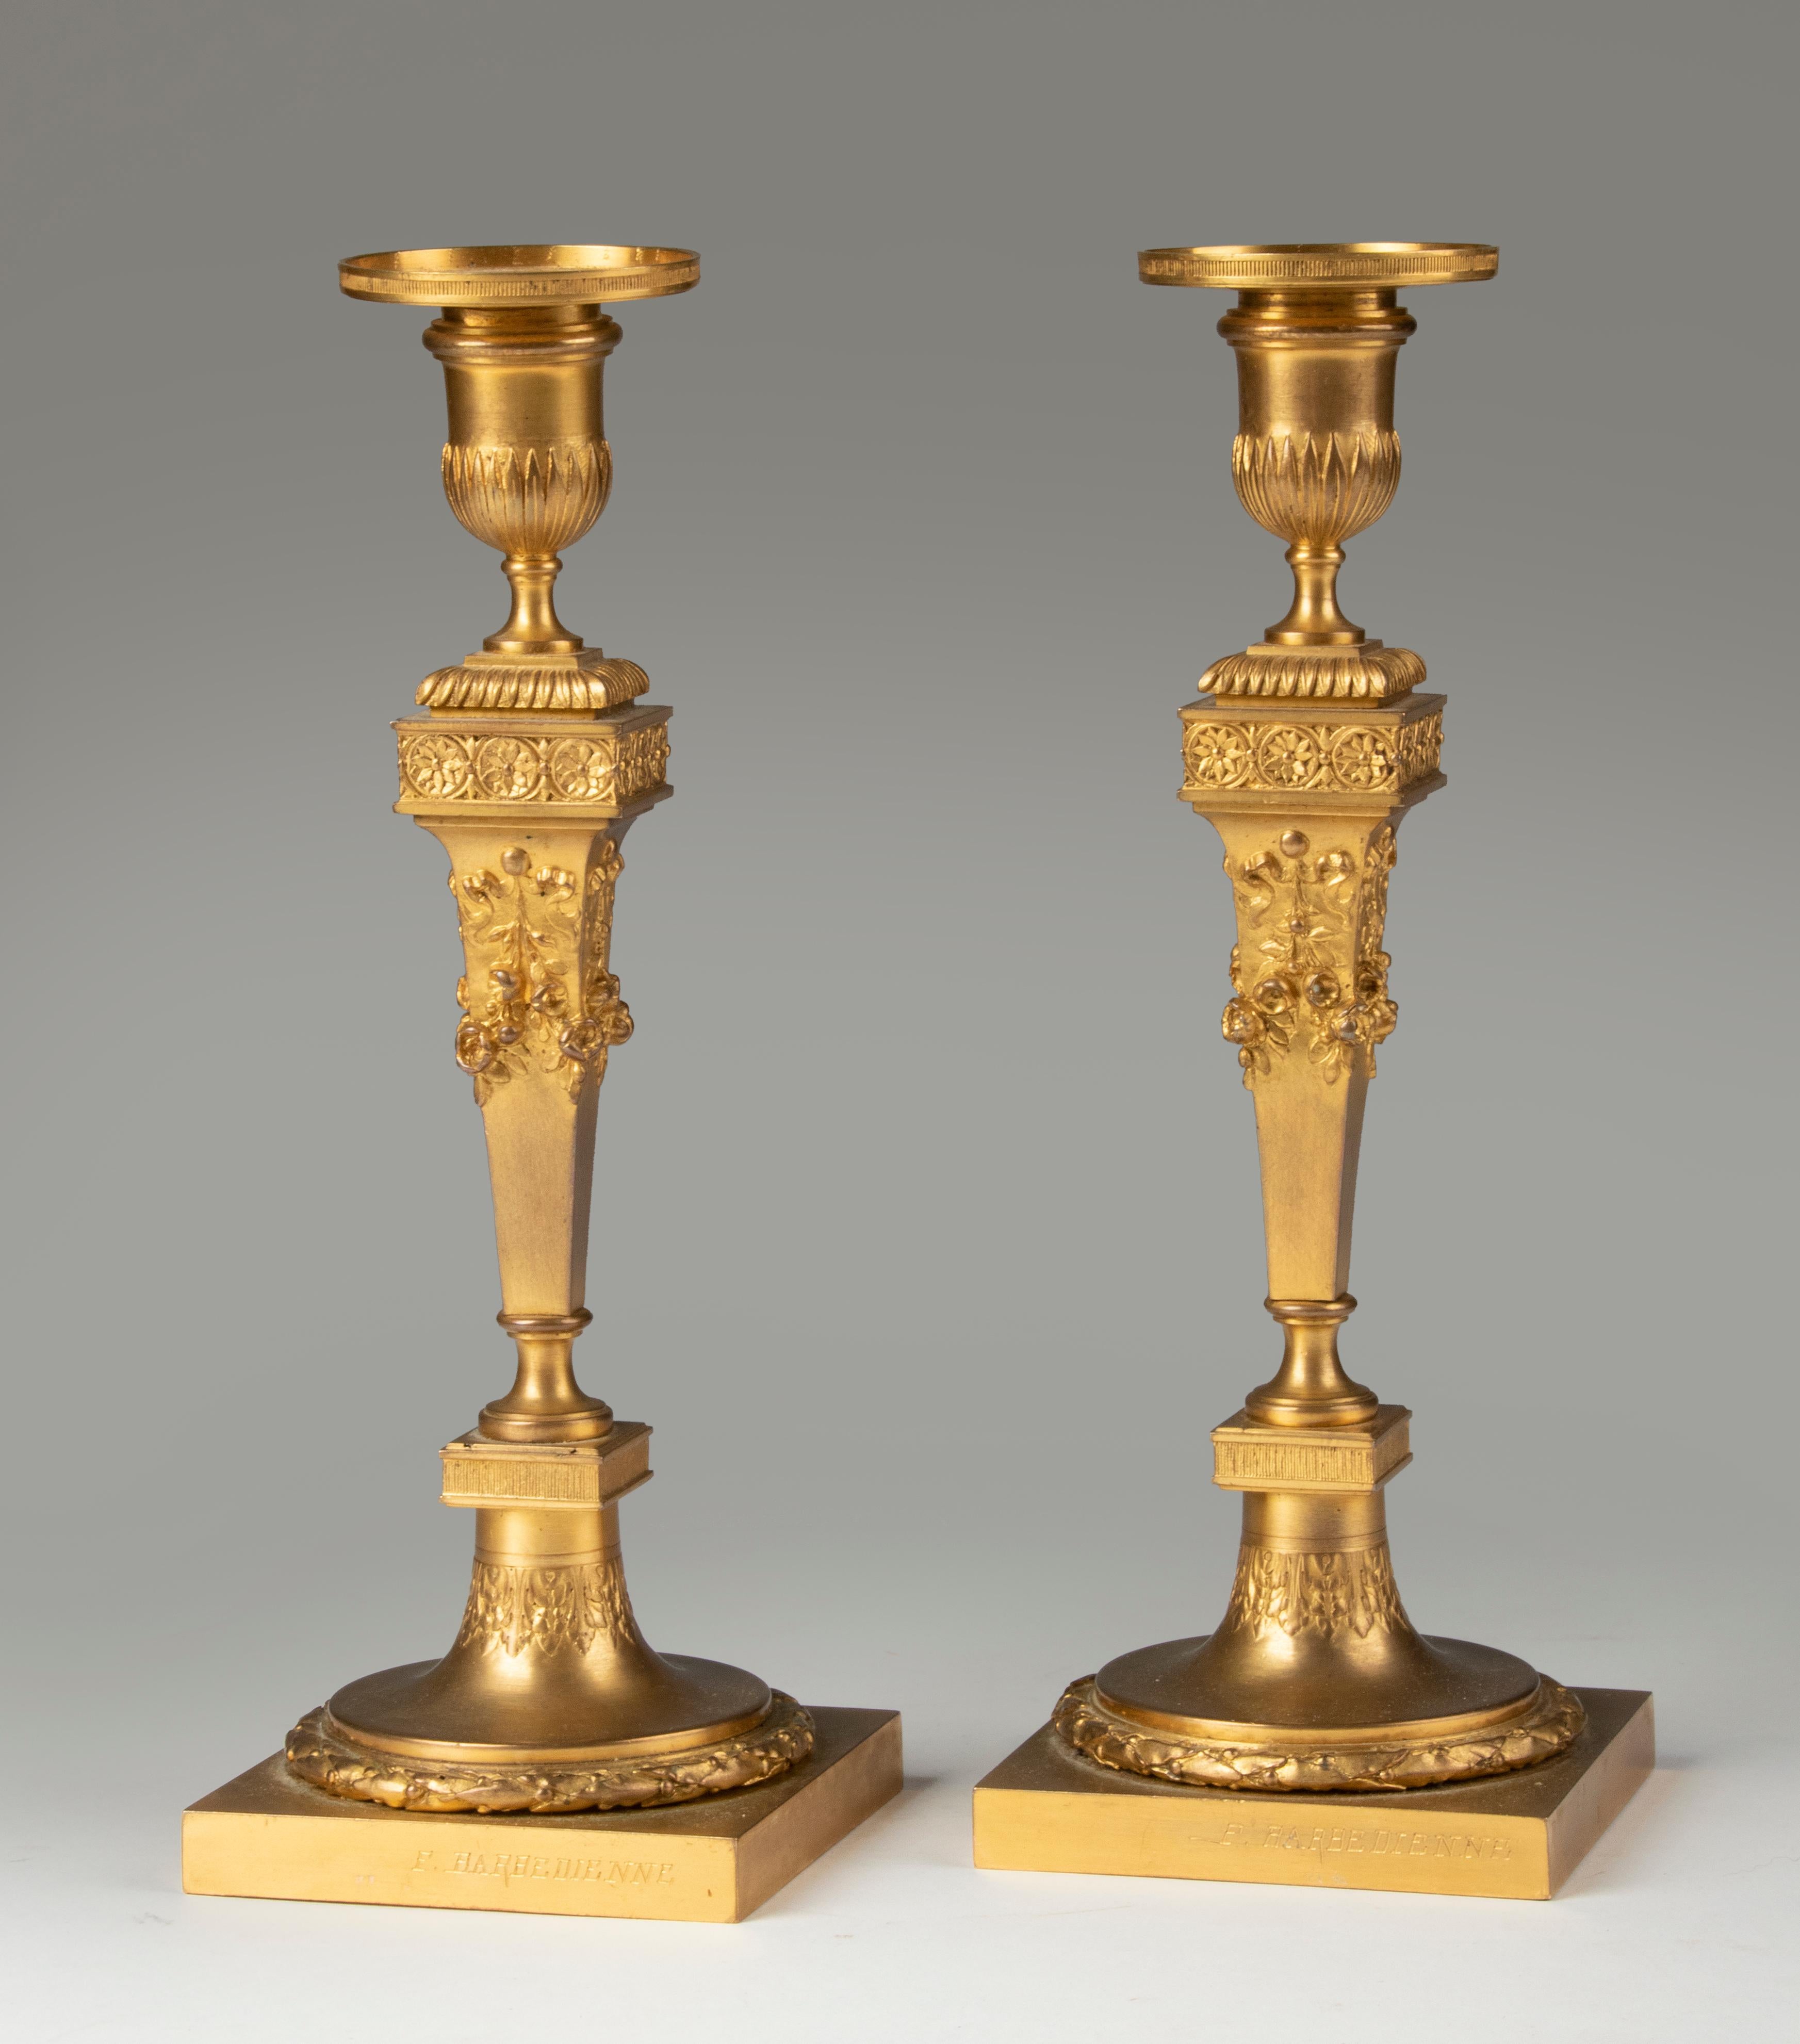 A pair of refined bronze fire-gilt candlesticks in Louis XVI style. Signed Ferdinand Barbedienne Foundry. The candlesticks are made of casted bronze with an ormolu fire-gilt finish. Typical Louis XVI style elements, such as laurel wreath around the